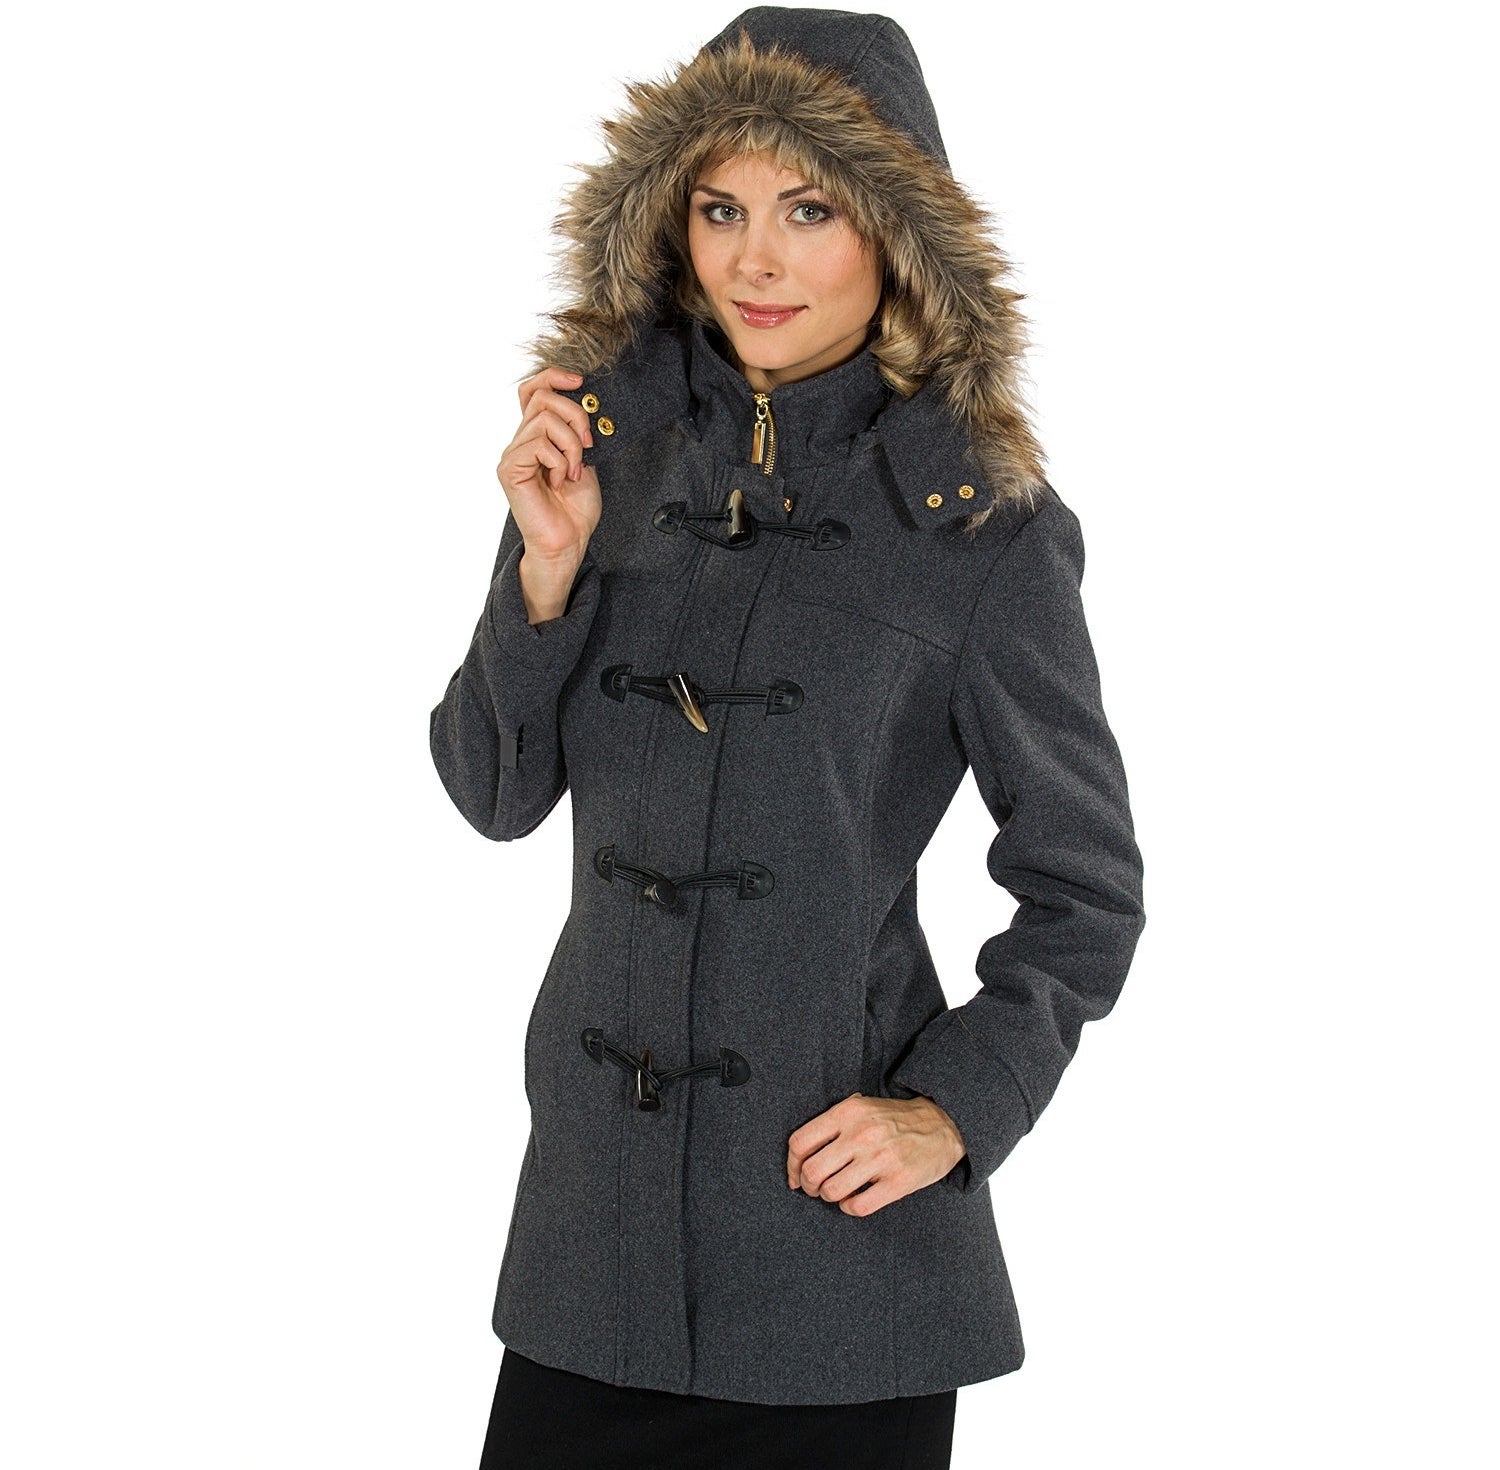 17 Of The Best Women's Winter Coats You Can Get On Amazon